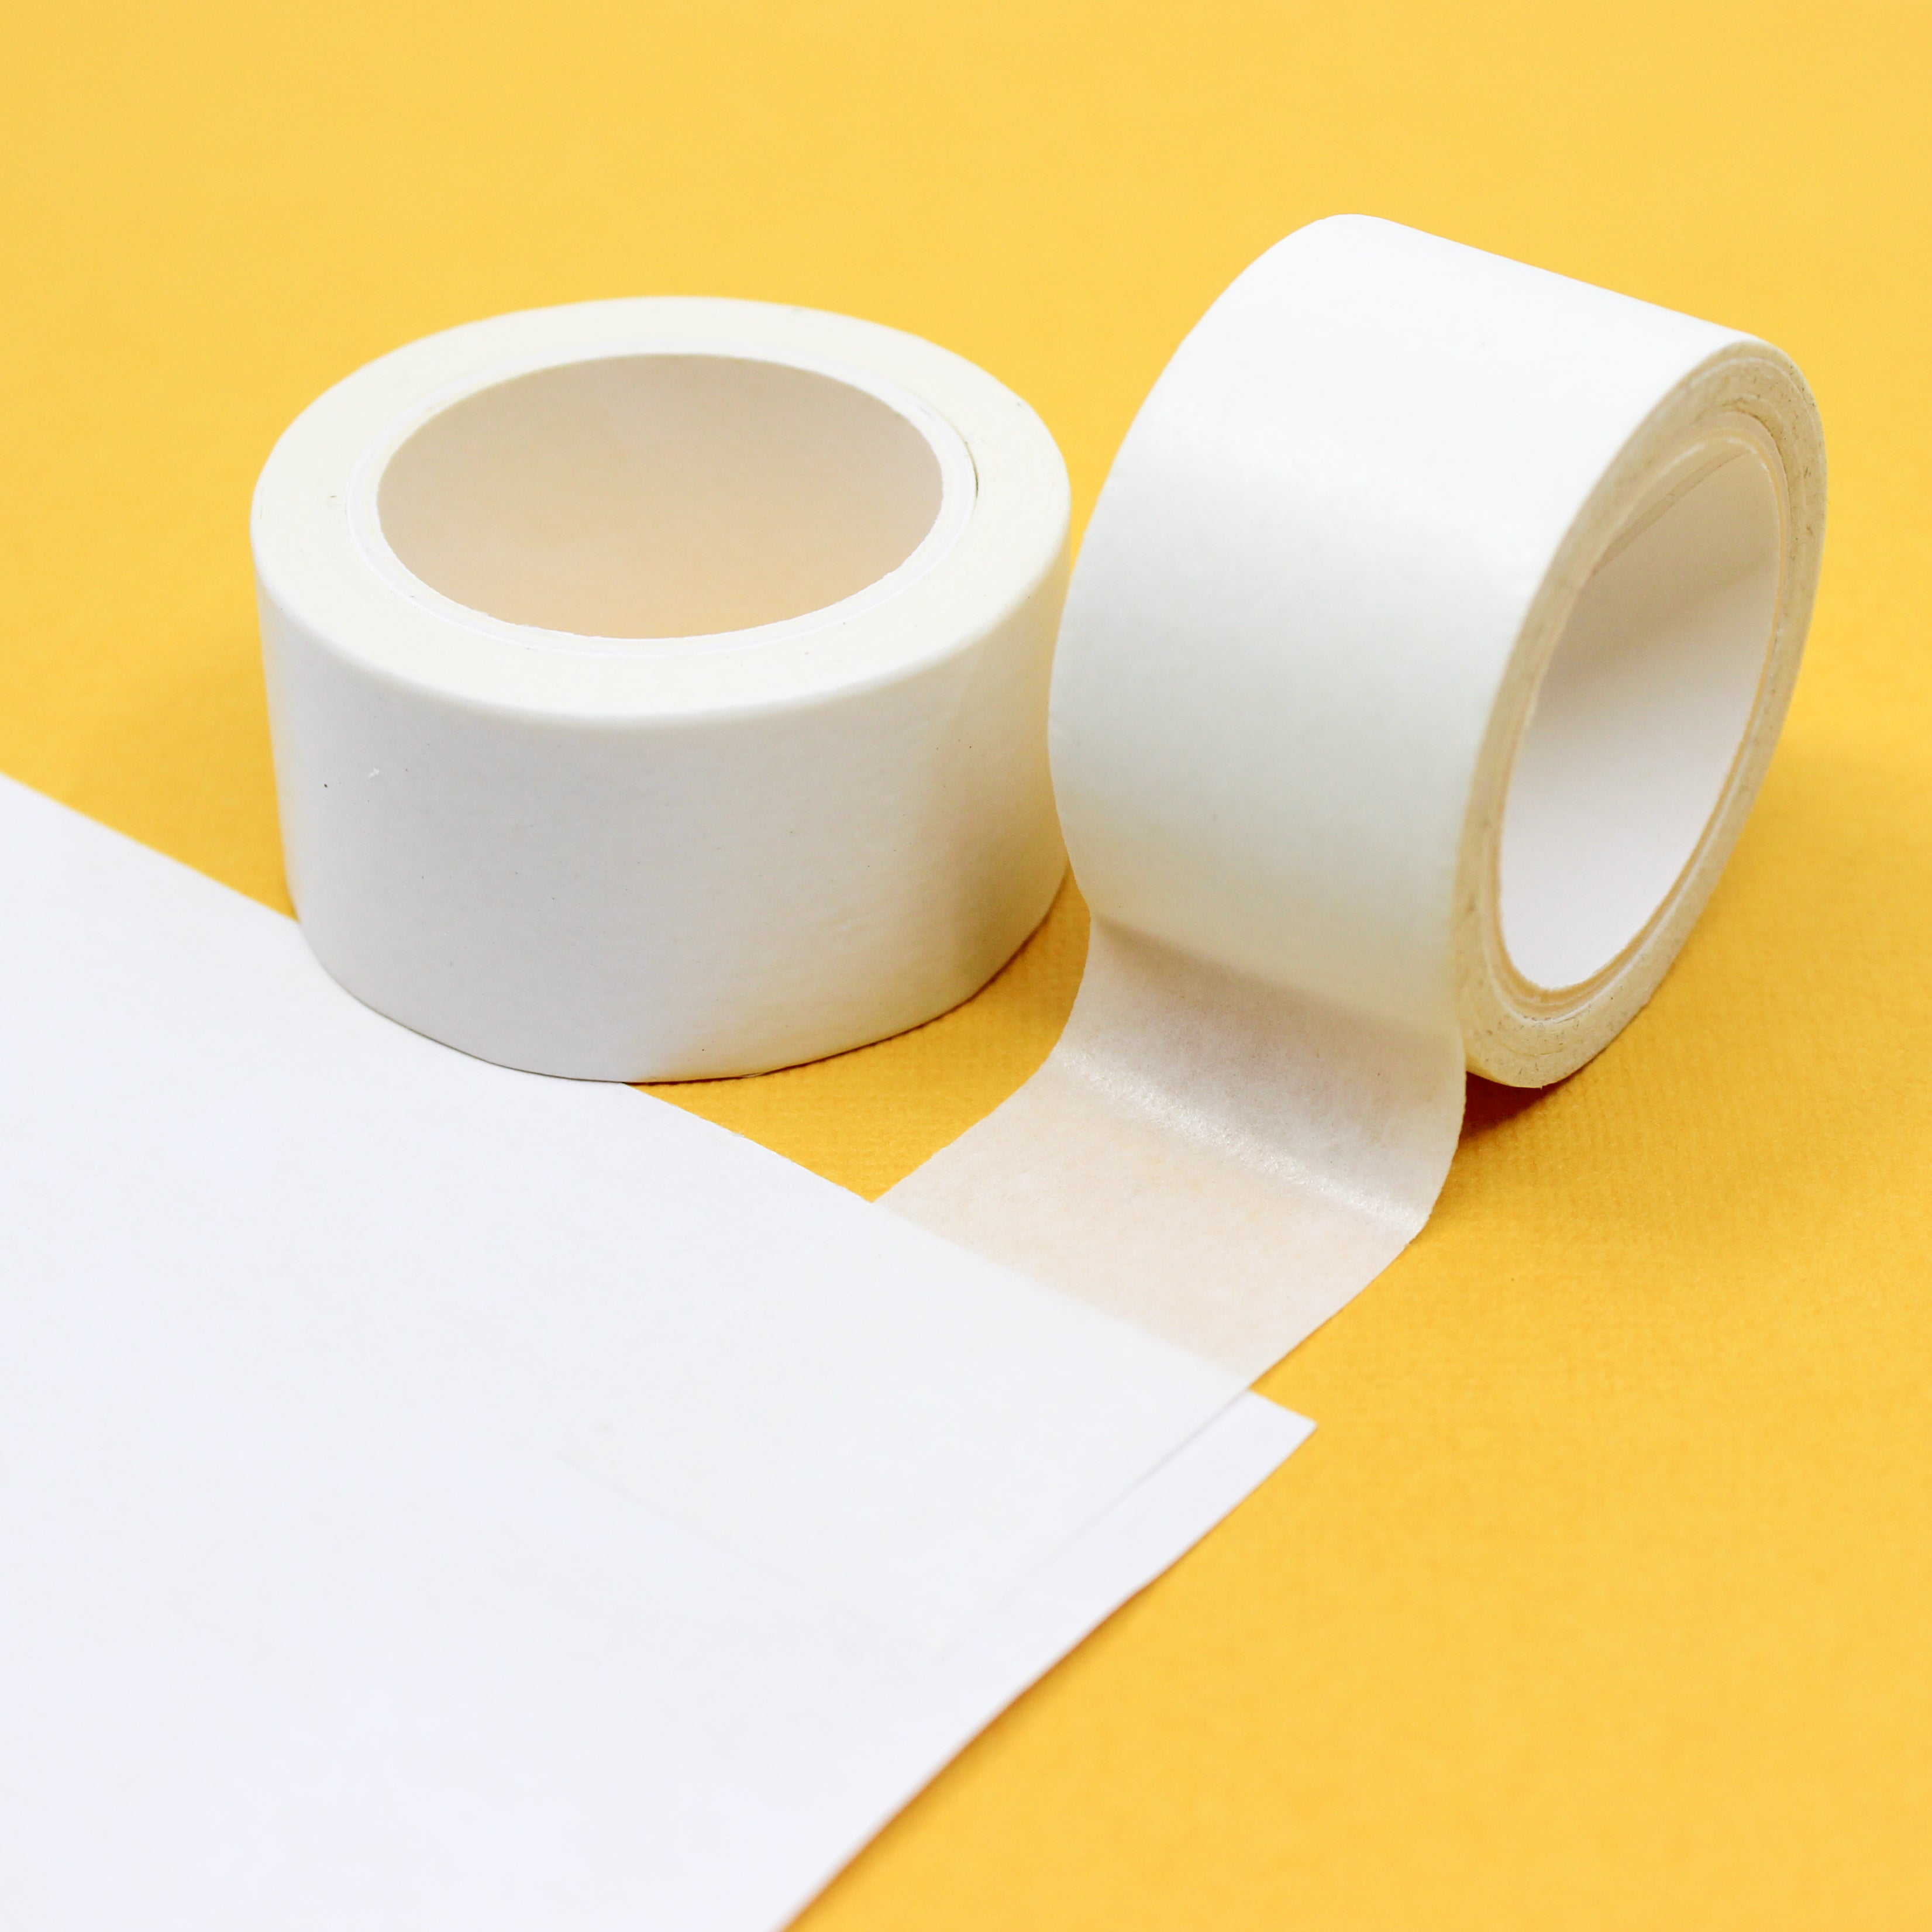 Enhance your crafts with our solid white washi tape, featuring a clean and minimalist design in a classic white hue, perfect for adding a versatile and elegant touch to your projects. This tape is sold exclusively at BBB Supplies Craft Shop.